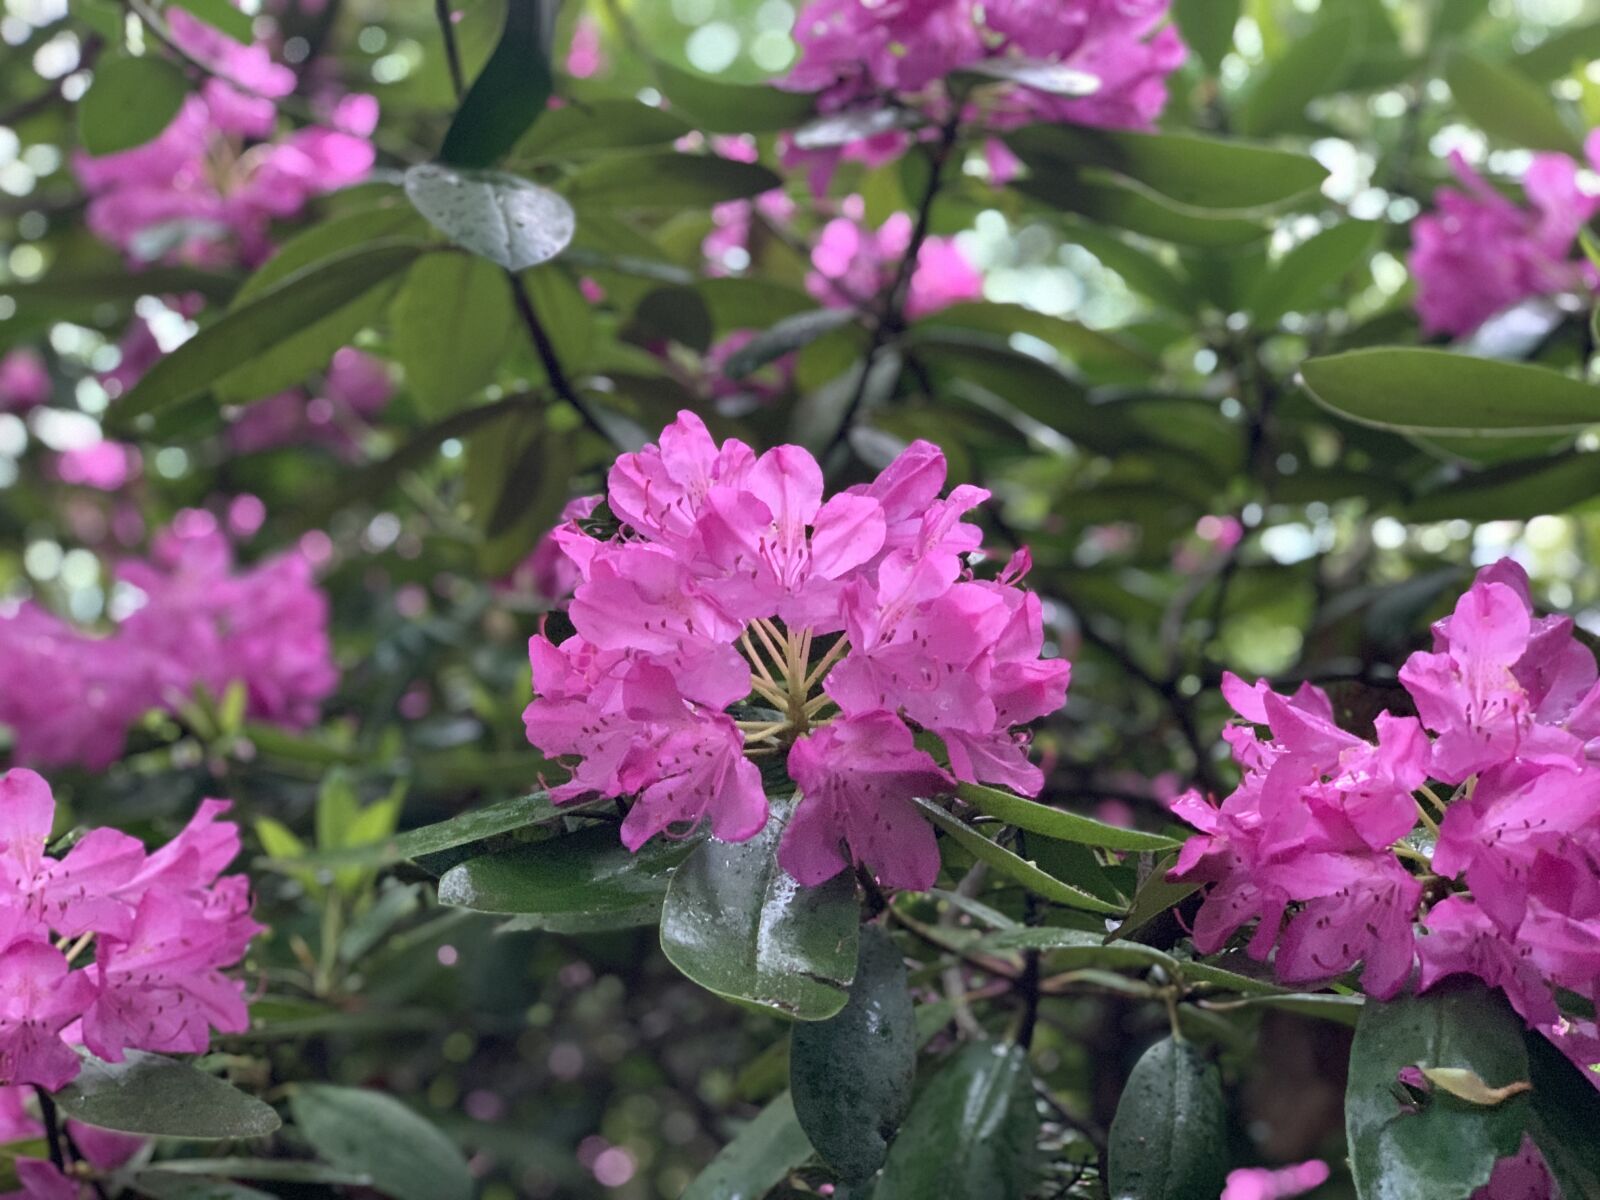 Apple iPhone XS Max + iPhone XS Max back dual camera 6mm f/2.4 sample photo. Flower, landscape, yard photography